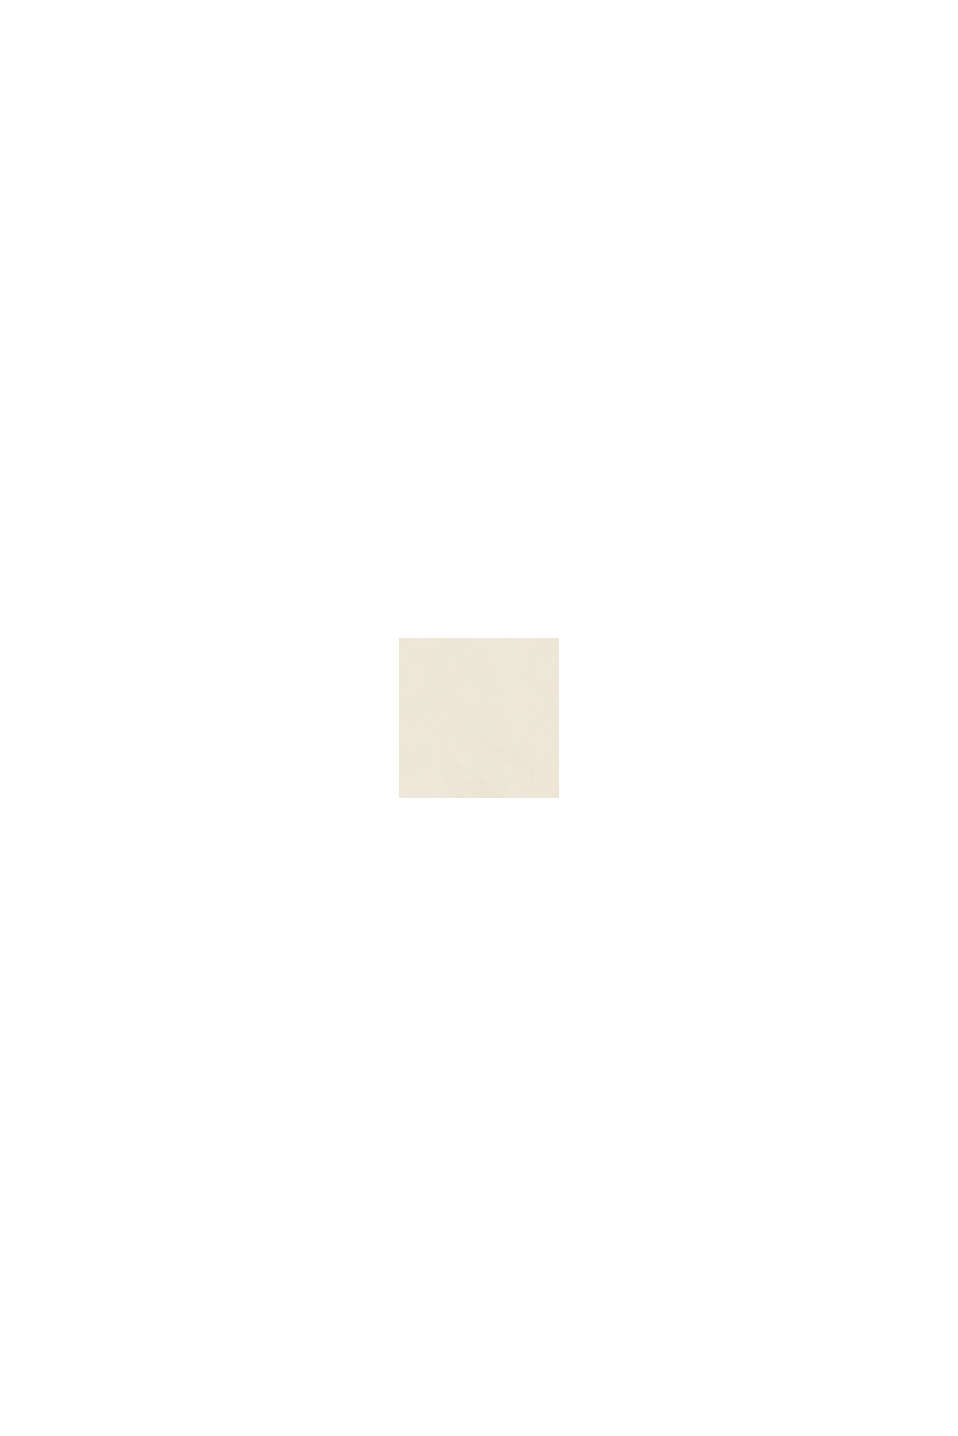 Riciclata: giacca outdoor impermeabile, BEIGE, swatch